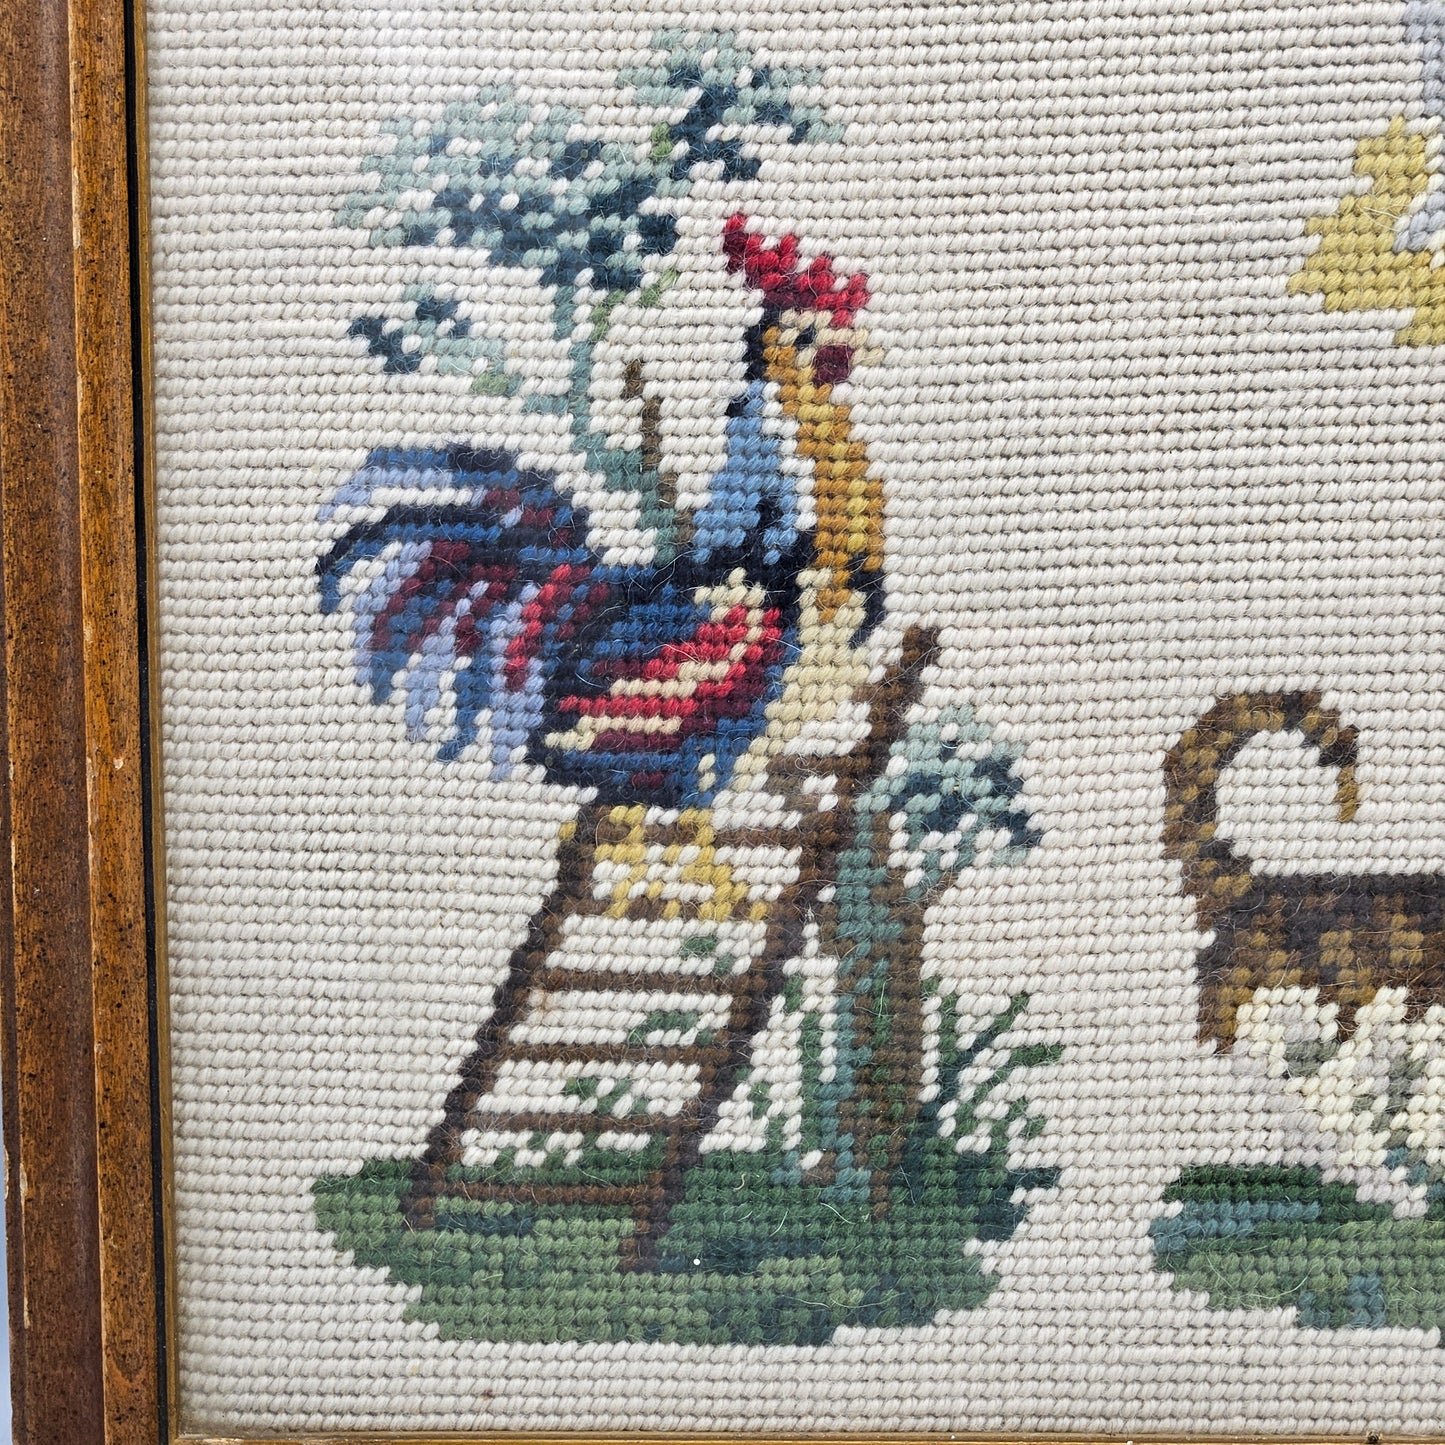 Vintage Framed Needlepoint Artwork with Roosters, Dogs & Cats